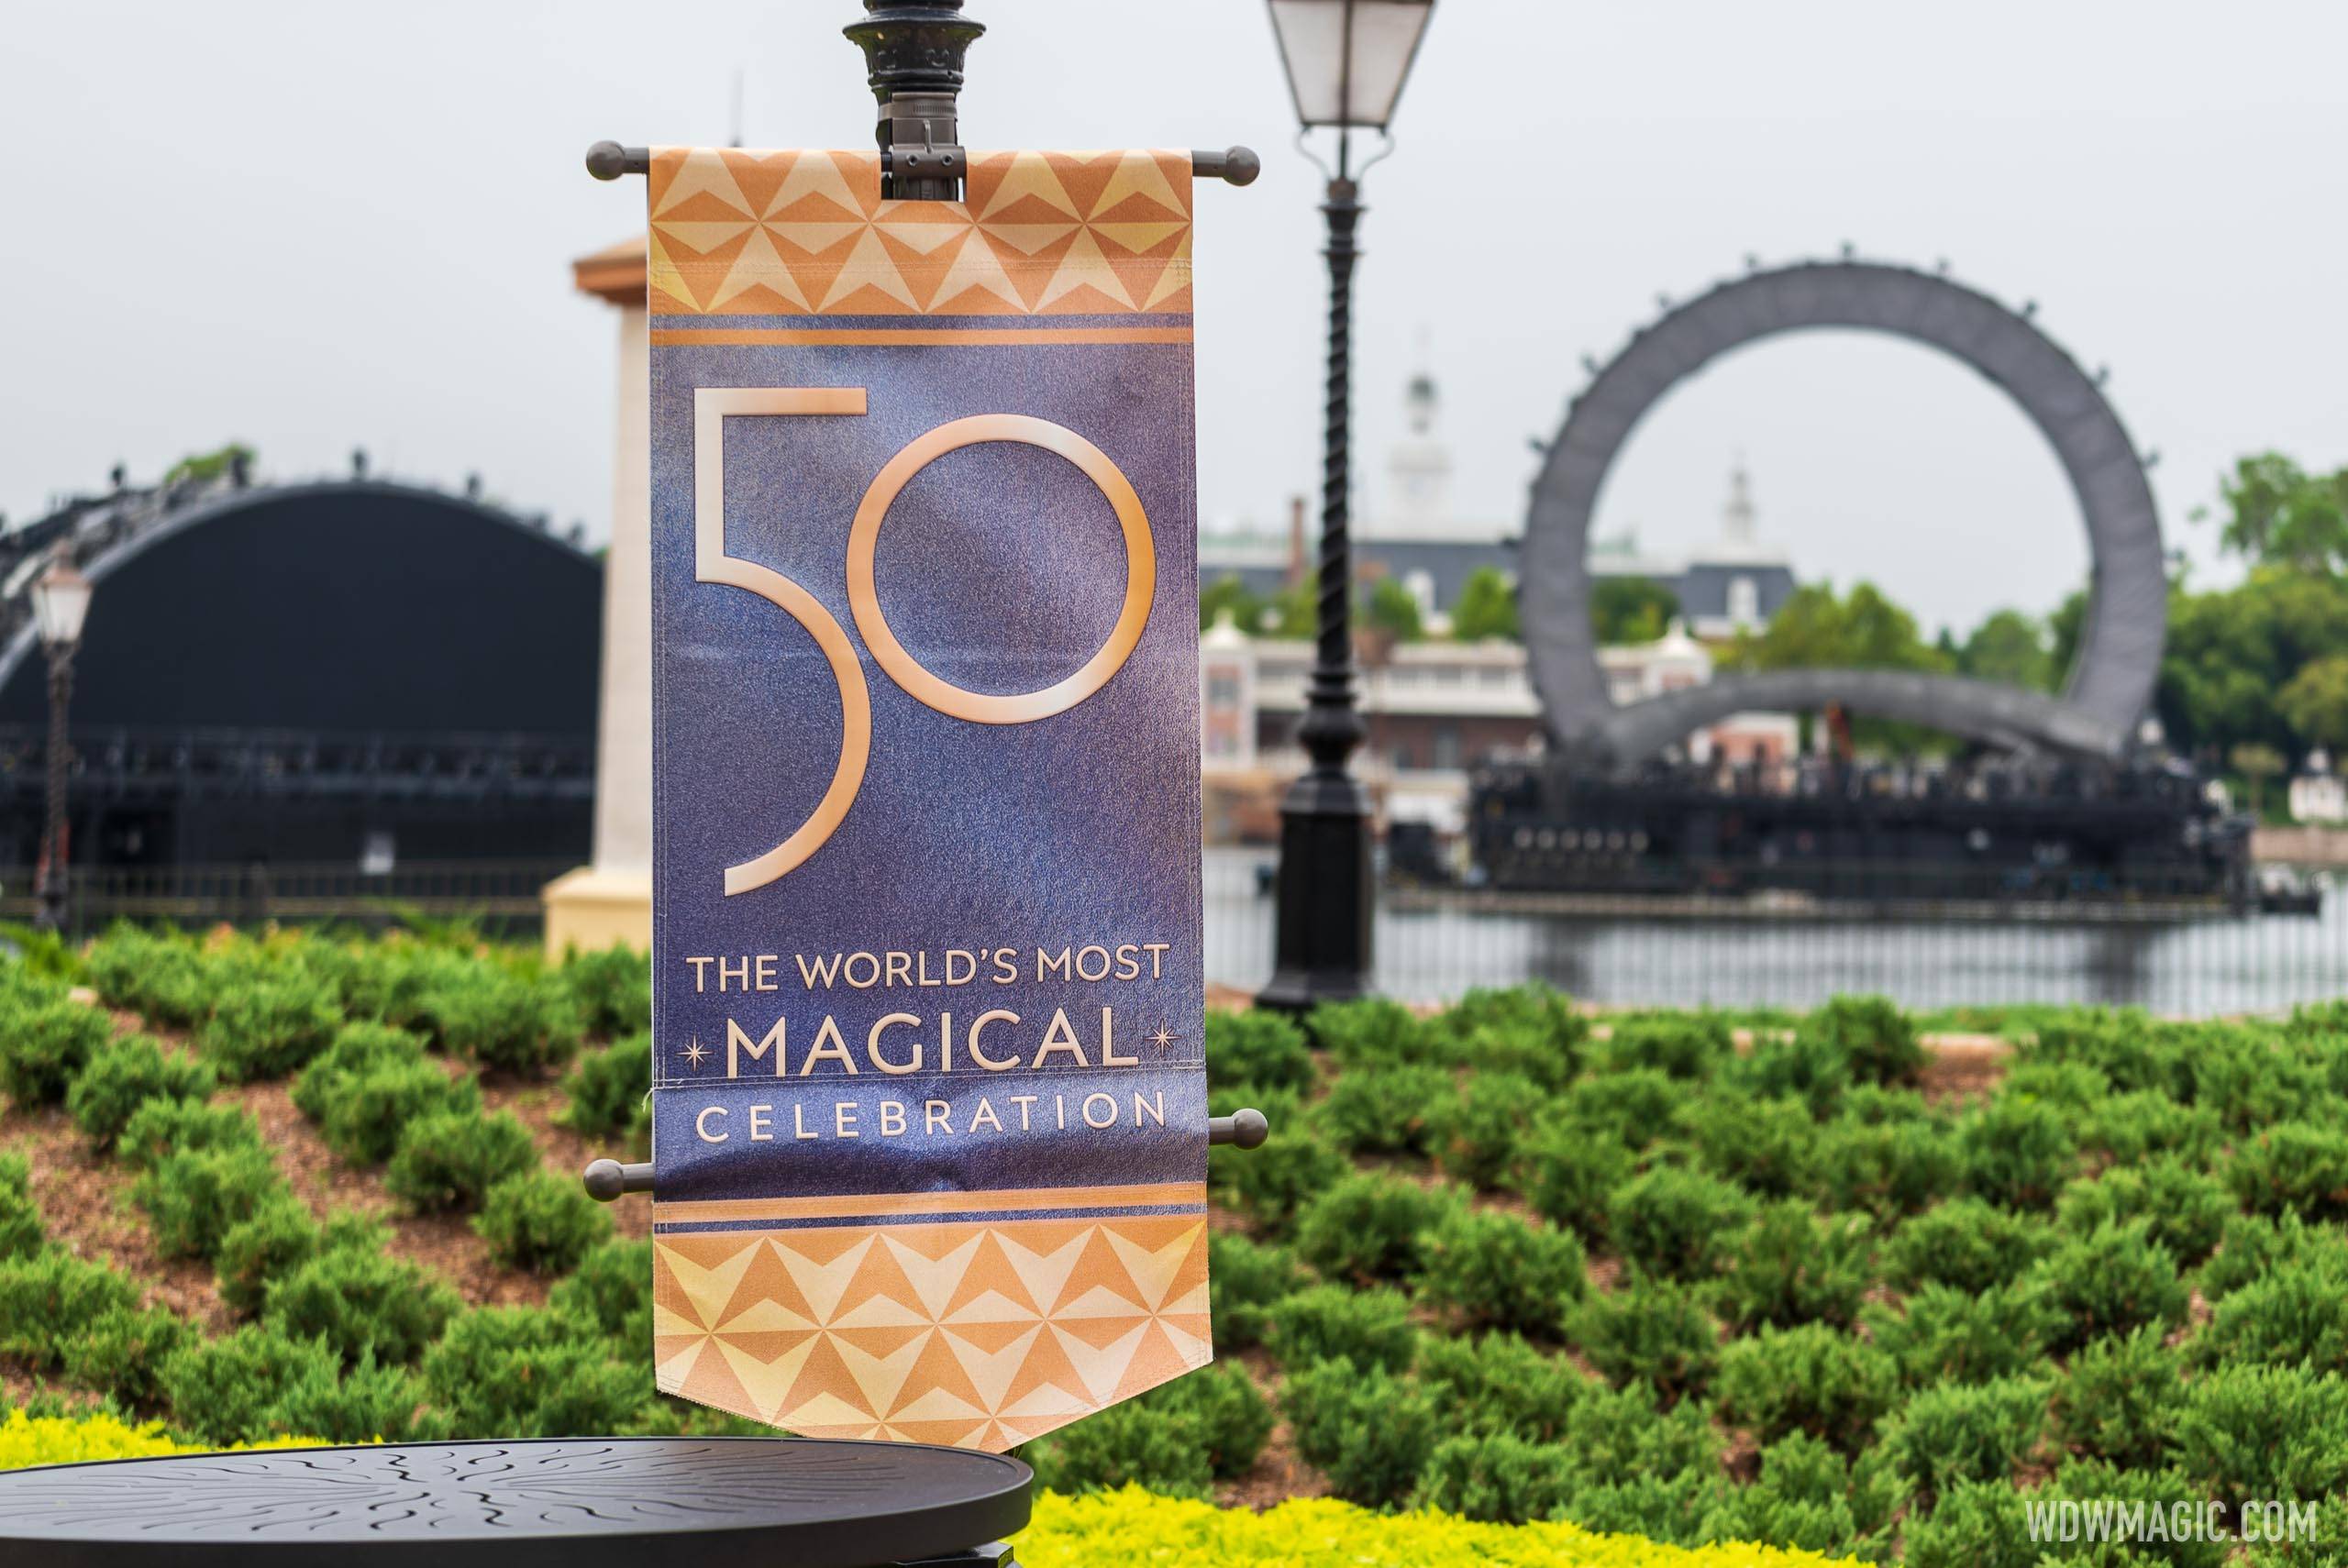 The World's Most Magical Celebration banners at EPCOT